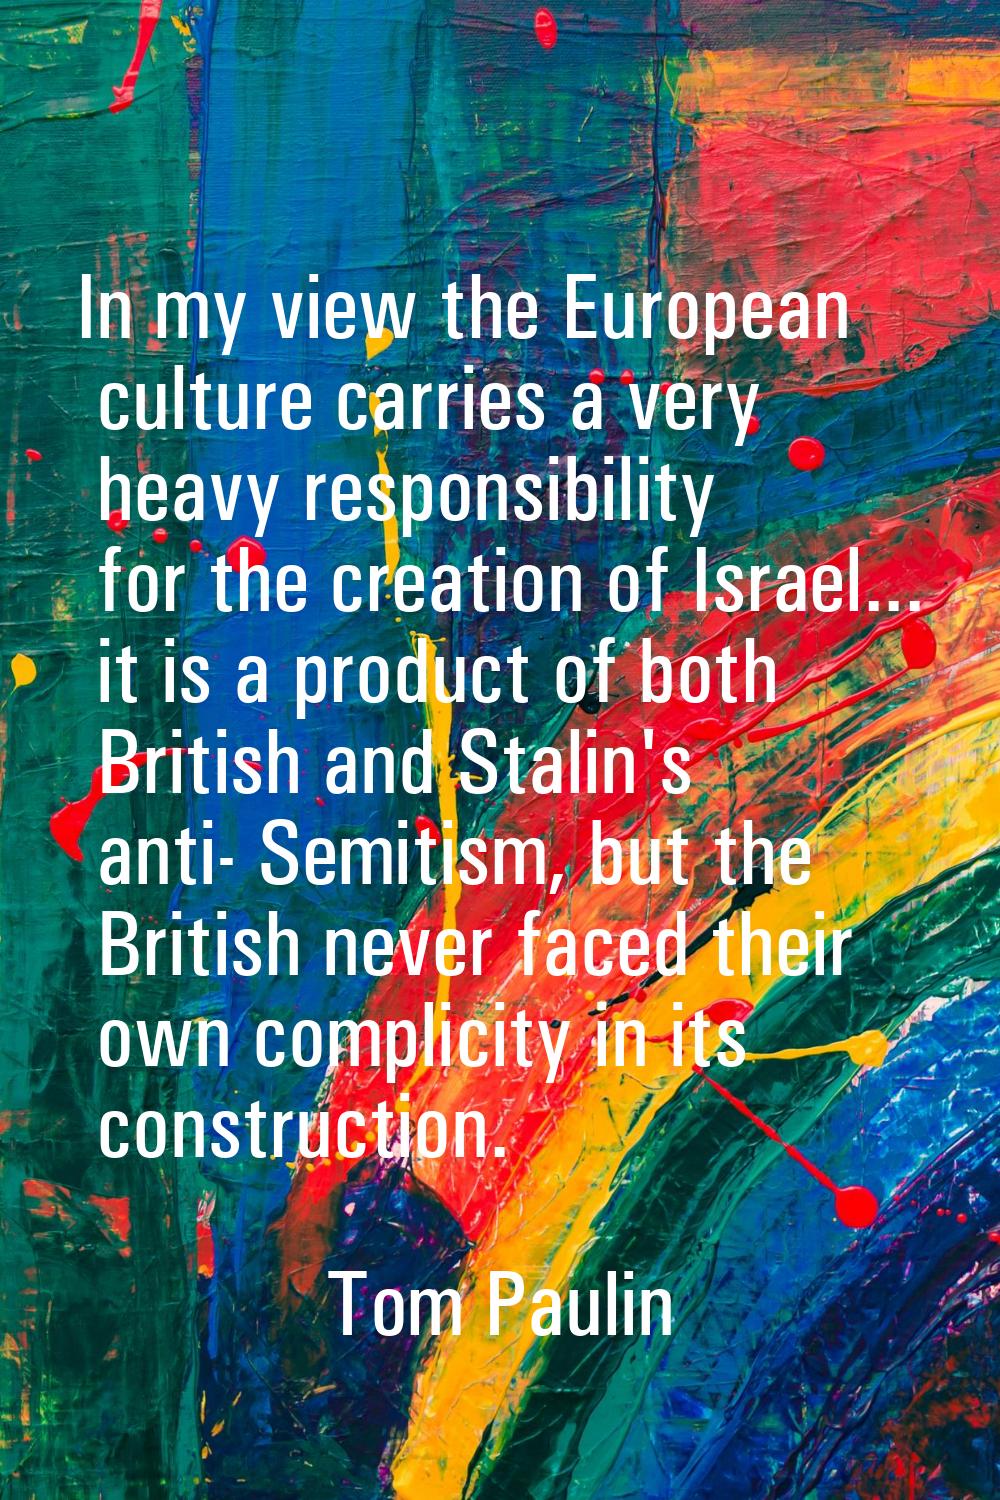 In my view the European culture carries a very heavy responsibility for the creation of Israel... i